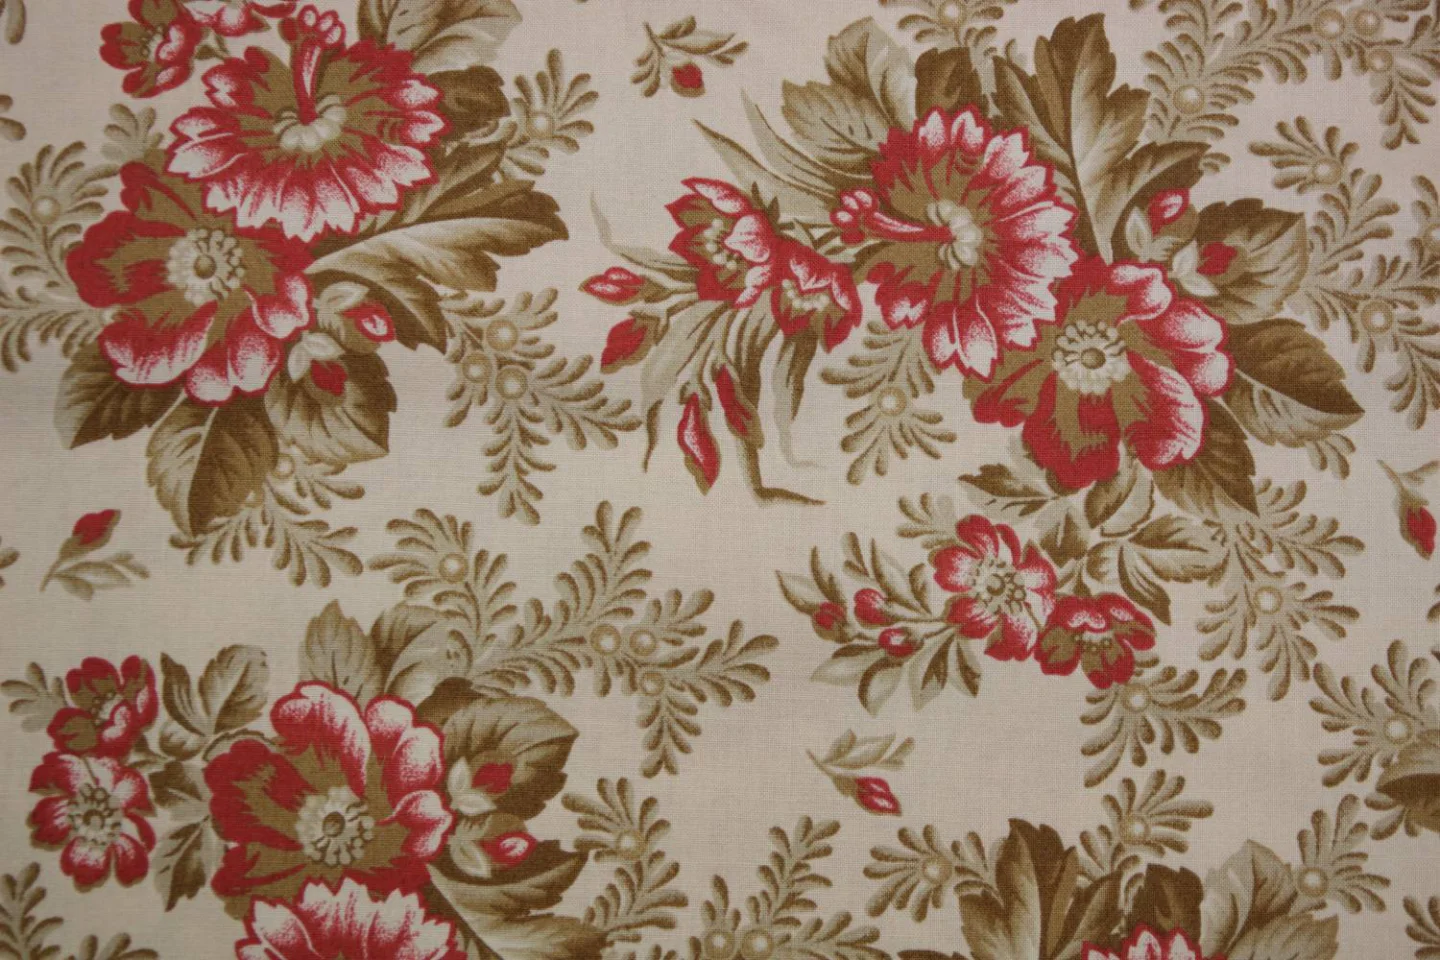 quiltstof-taupe-bloemen in rood, taupe e.